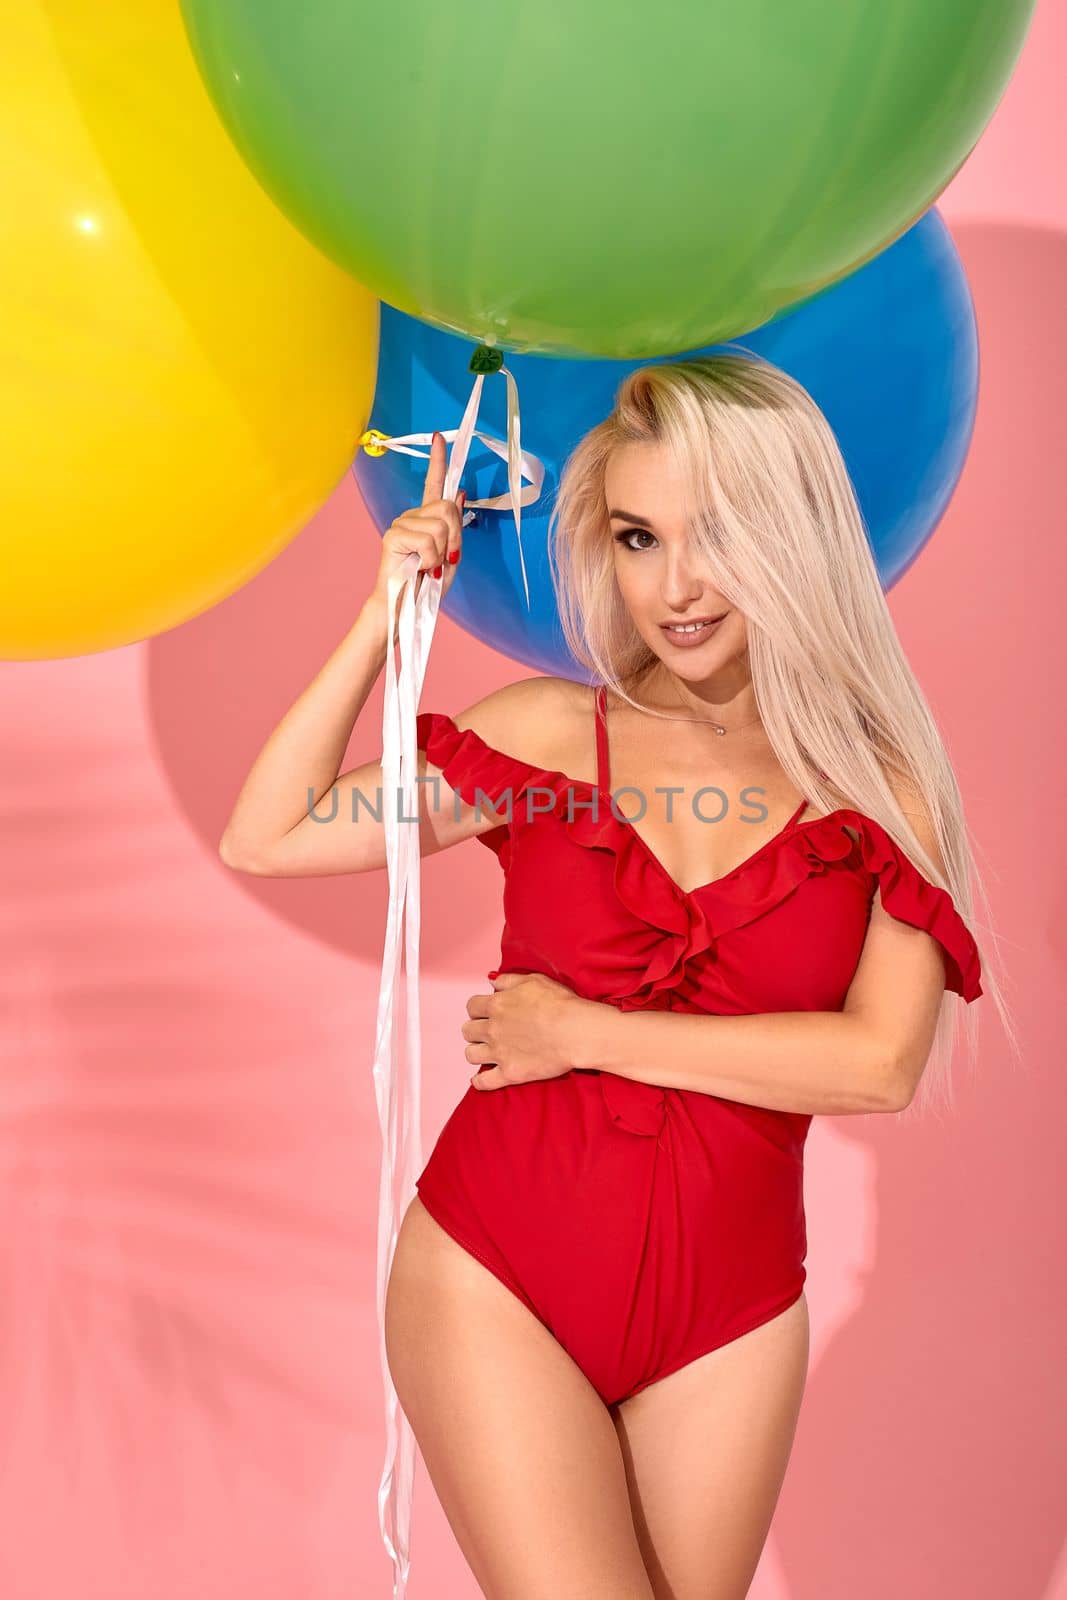 Young sexy slim woman in a red swimsuit with balloons in her hand is smiling at the camera. Full length fashion portrait of a beautiful girl with long blond hair, on a pink background.